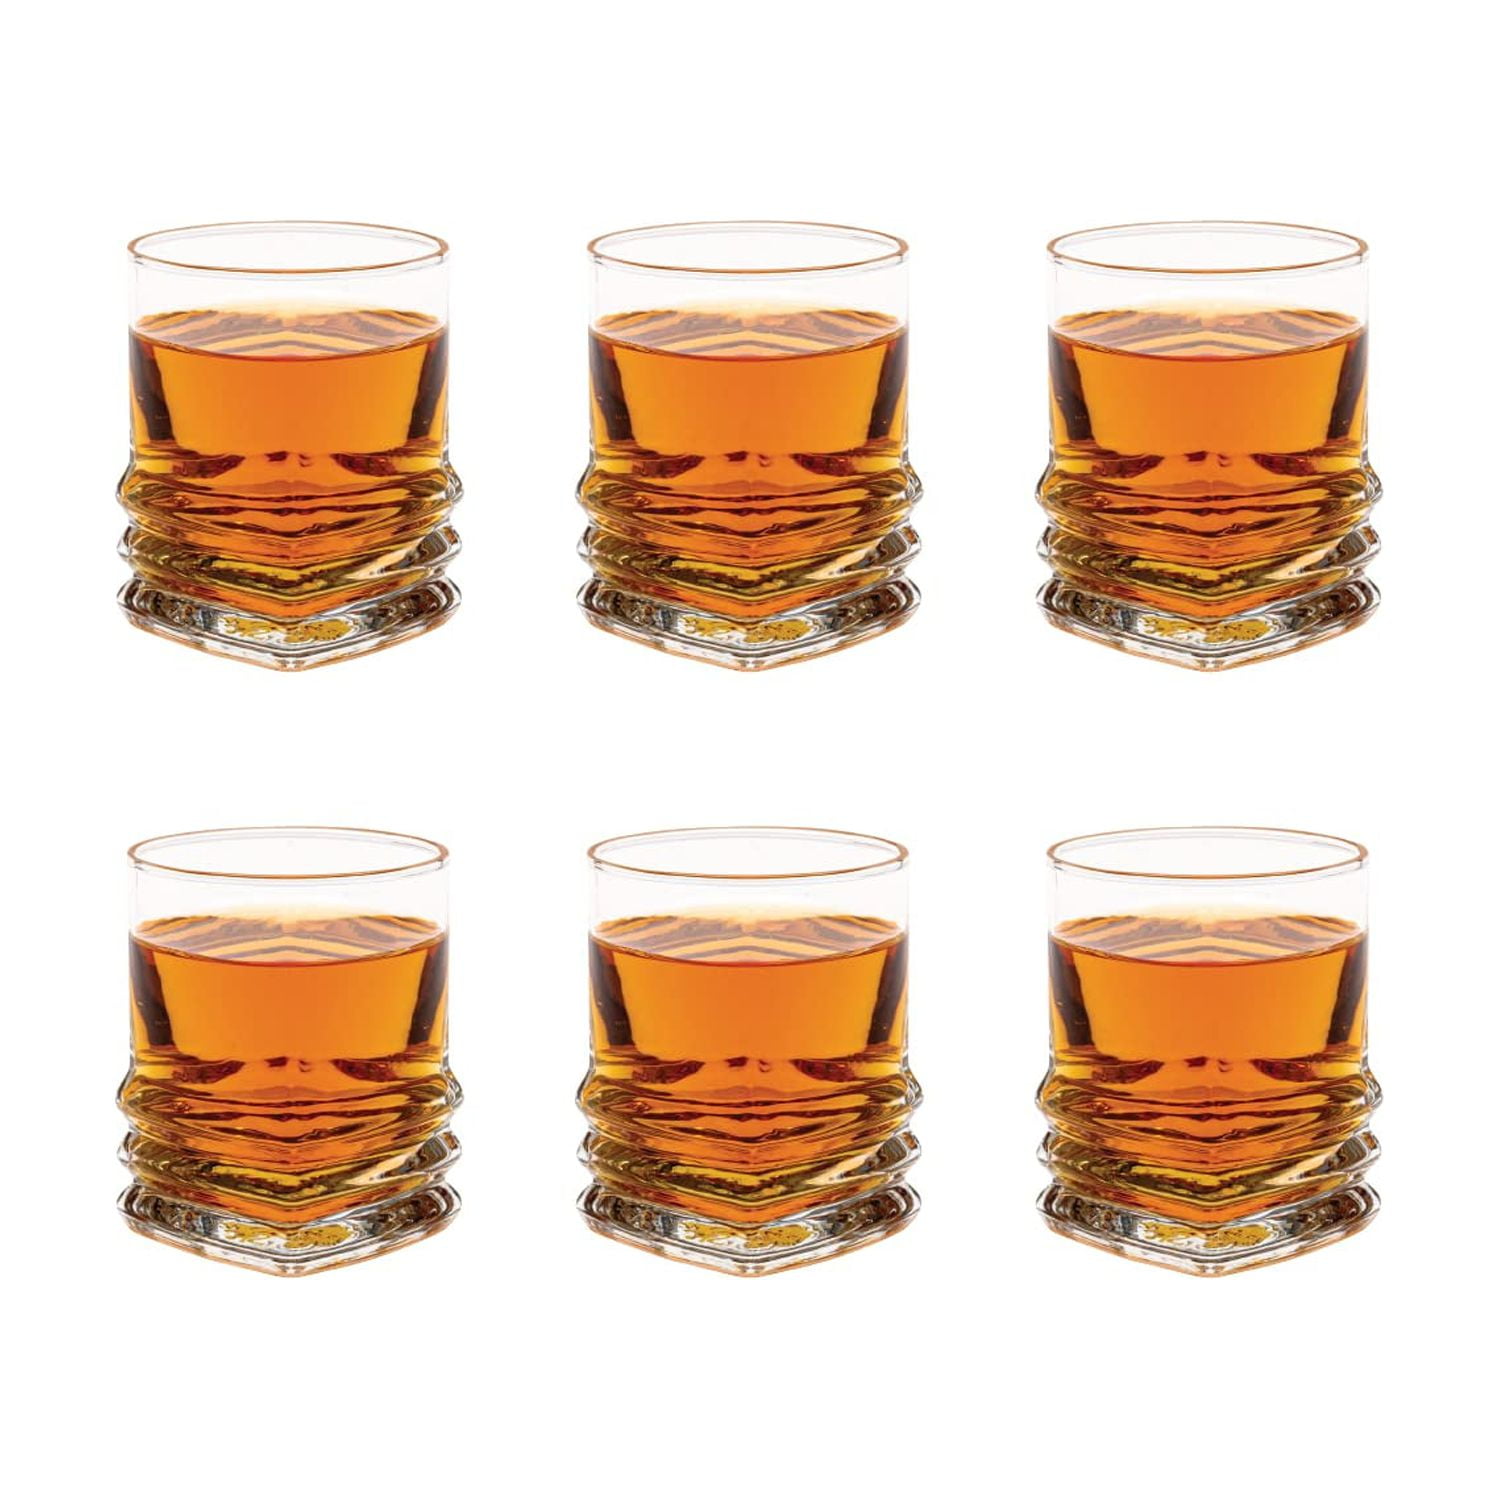 Vikko 3.5 Ounce Shot Glasses, Set of 6 Small Liquor and Spirit Glasses, Durable Tequila Bar Glasses for Alcohol and Espresso Shots, 6 Piece Large